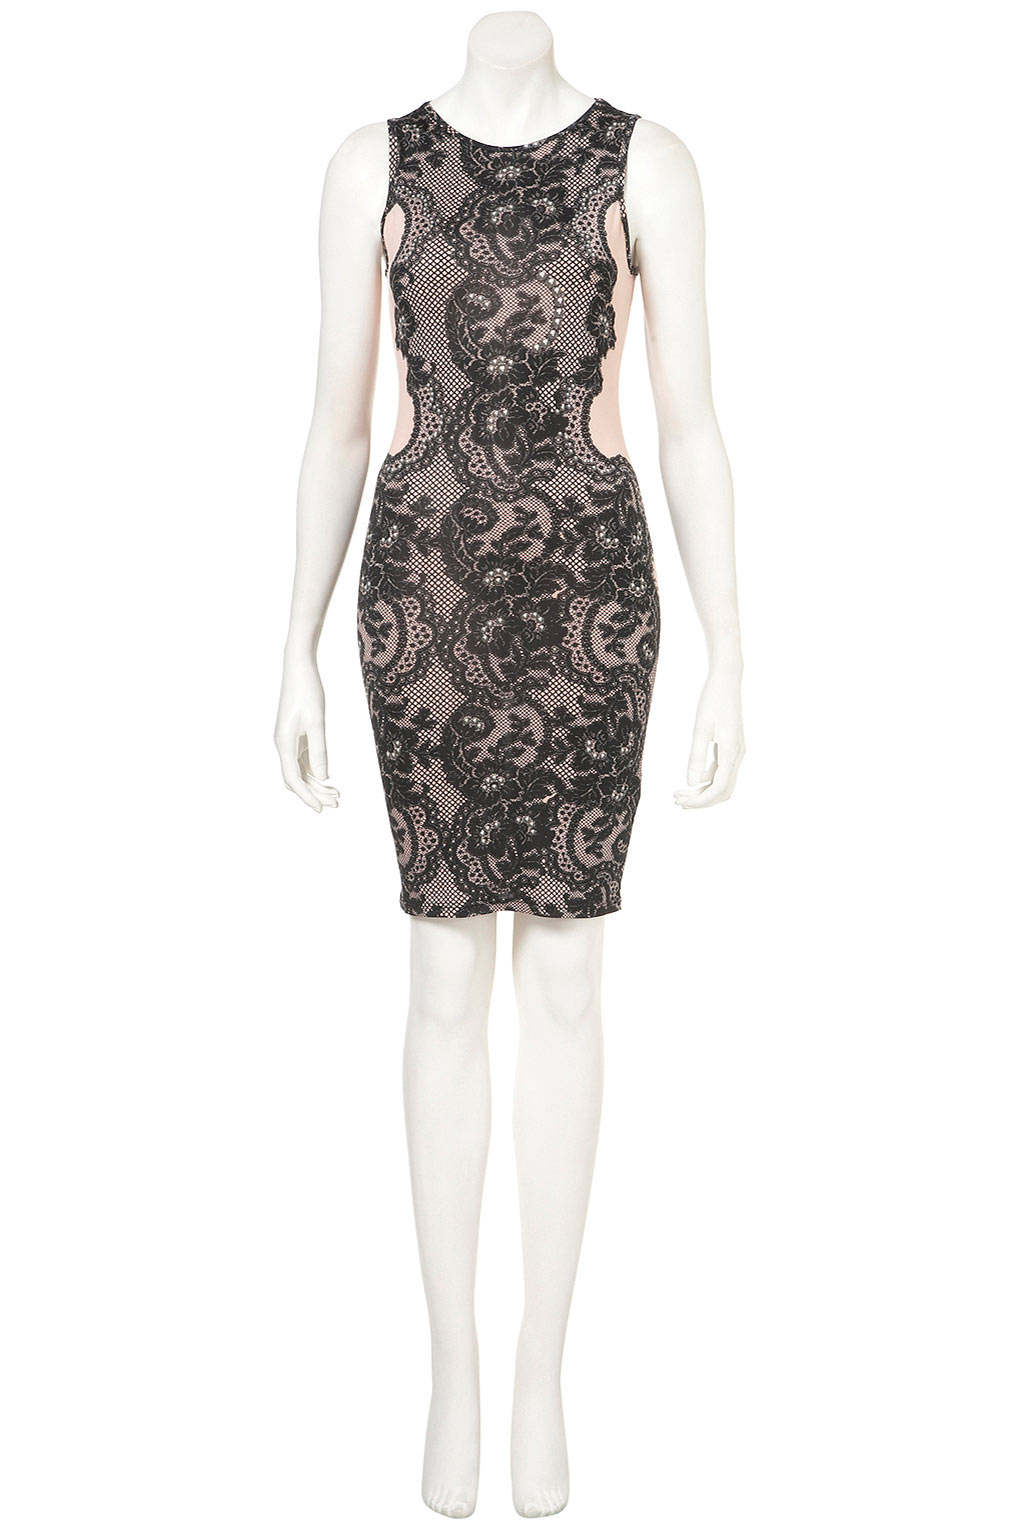 Lyst - Topshop Lace and Gem Bodycon Dress in Purple